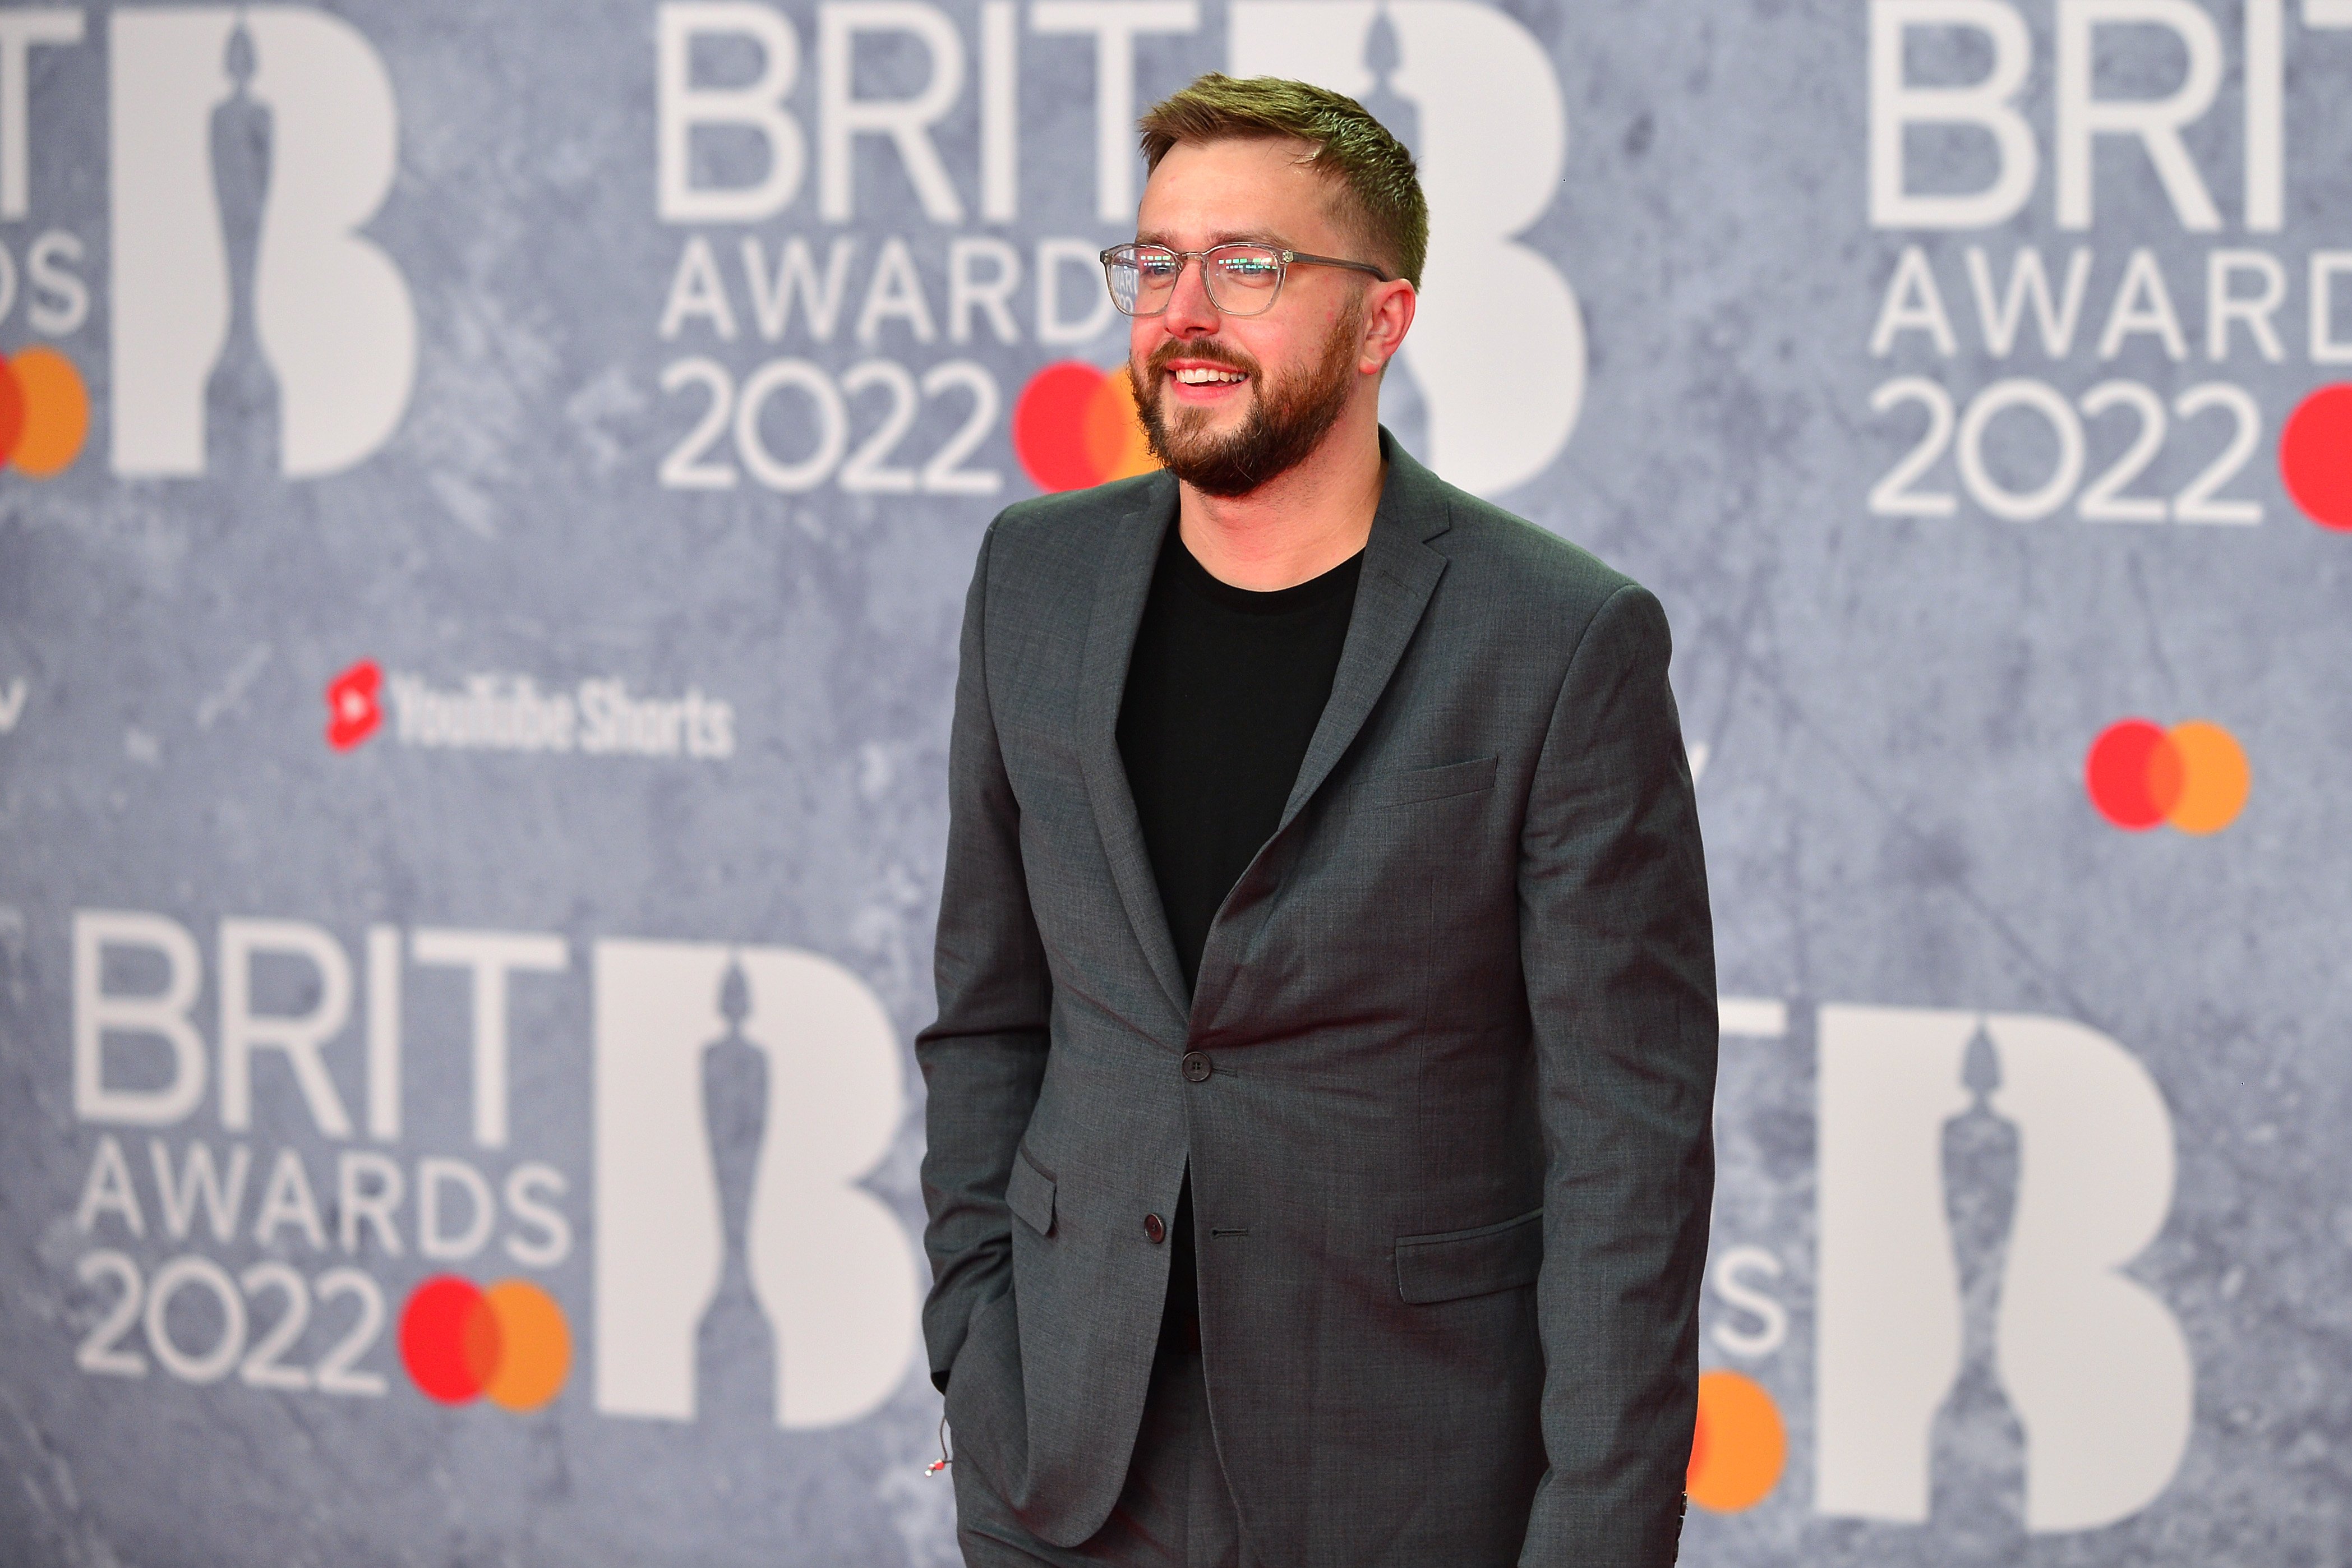 Iain Stirling smiling at the BRIT Awards 2022